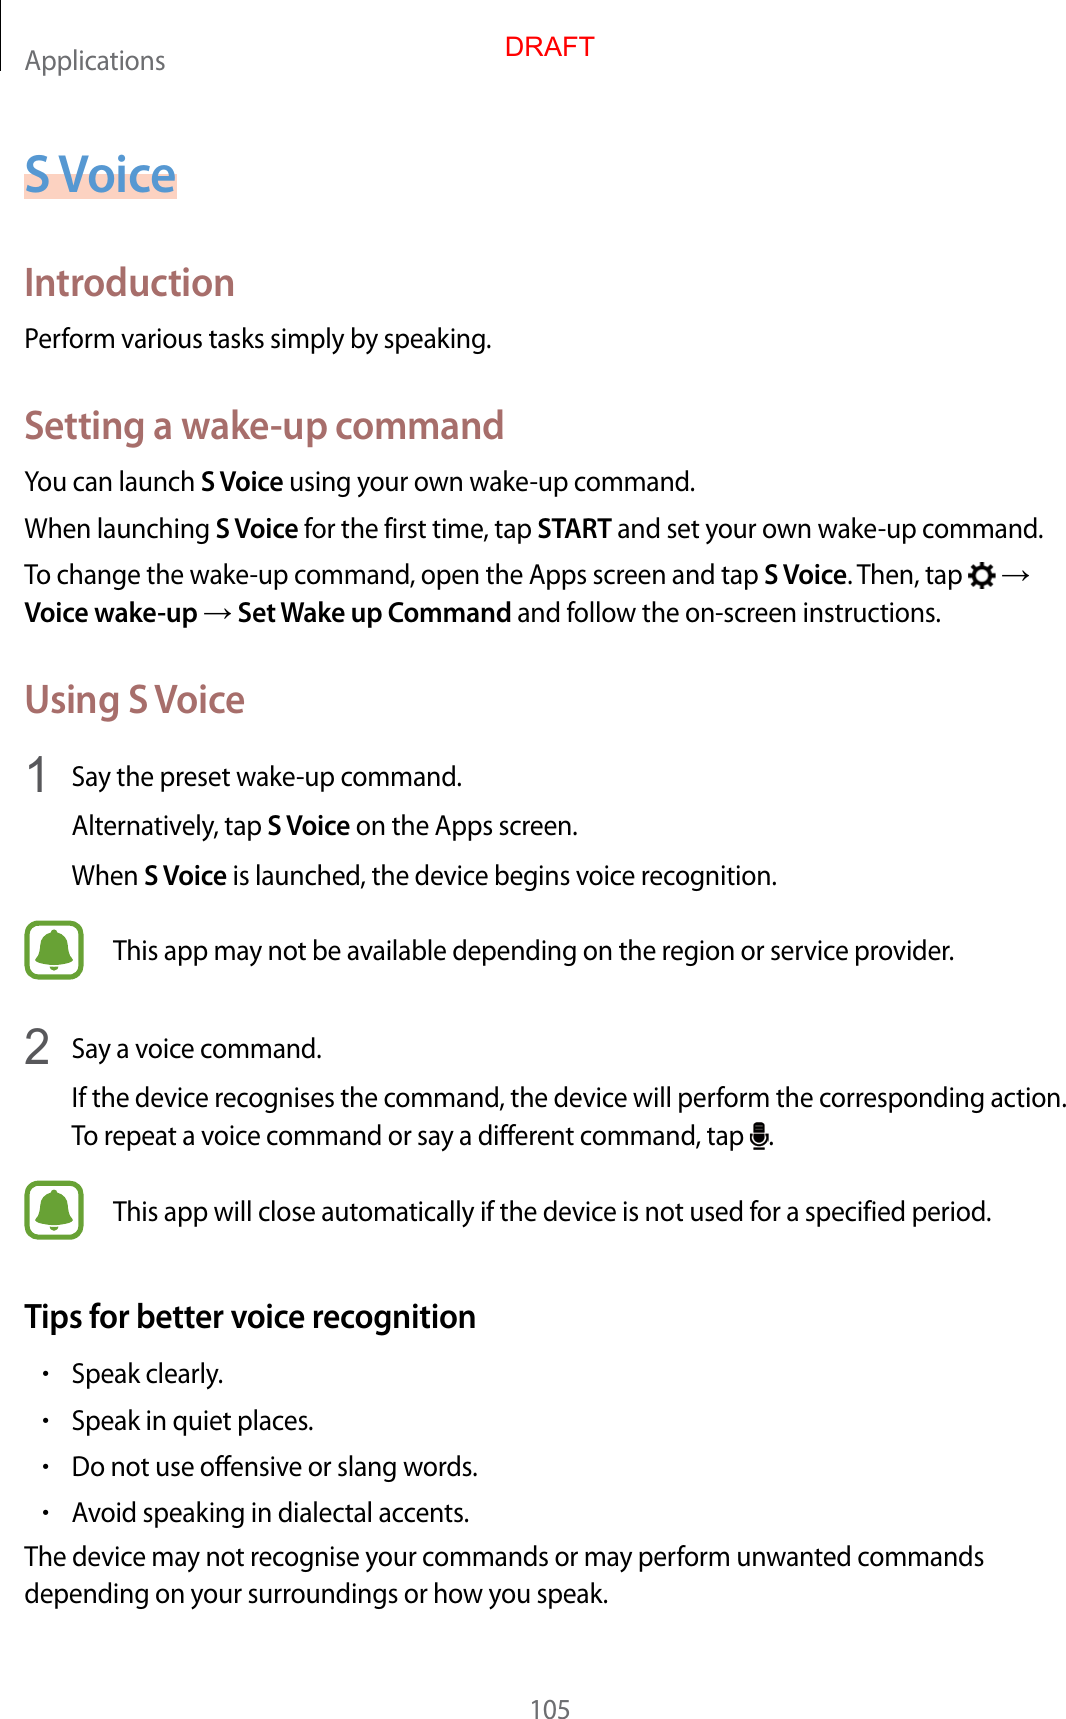 Applications105S VoiceIntroductionPerform various tasks simply by speaking.Setting a wake-up commandYou can launch S Voice using your own wake-up command.When launching S Voice for the first time, tap START and set your own wake-up command.To change the wake-up command, open the Apps screen and tap S Voice. Then, tap    Voice wake-up  Set Wake up Command and follow the on-screen instructions.Using S Voice1  Say the preset wake-up command.Alternatively, tap S Voice on the Apps screen.When S Voice is launched, the device begins voice recognition.This app may not be available depending on the region or service provider.2  Say a voice command.If the device recognises the command, the device will perform the corresponding action. To repeat a voice command or say a different command, tap  .This app will close automatically if the device is not used for a specified period.Tips for better voice recognition•Speak clearly.•Speak in quiet places.•Do not use offensive or slang words.•Avoid speaking in dialectal accents.The device may not recognise your commands or may perform unwanted commands depending on your surroundings or how you speak.DRAFT